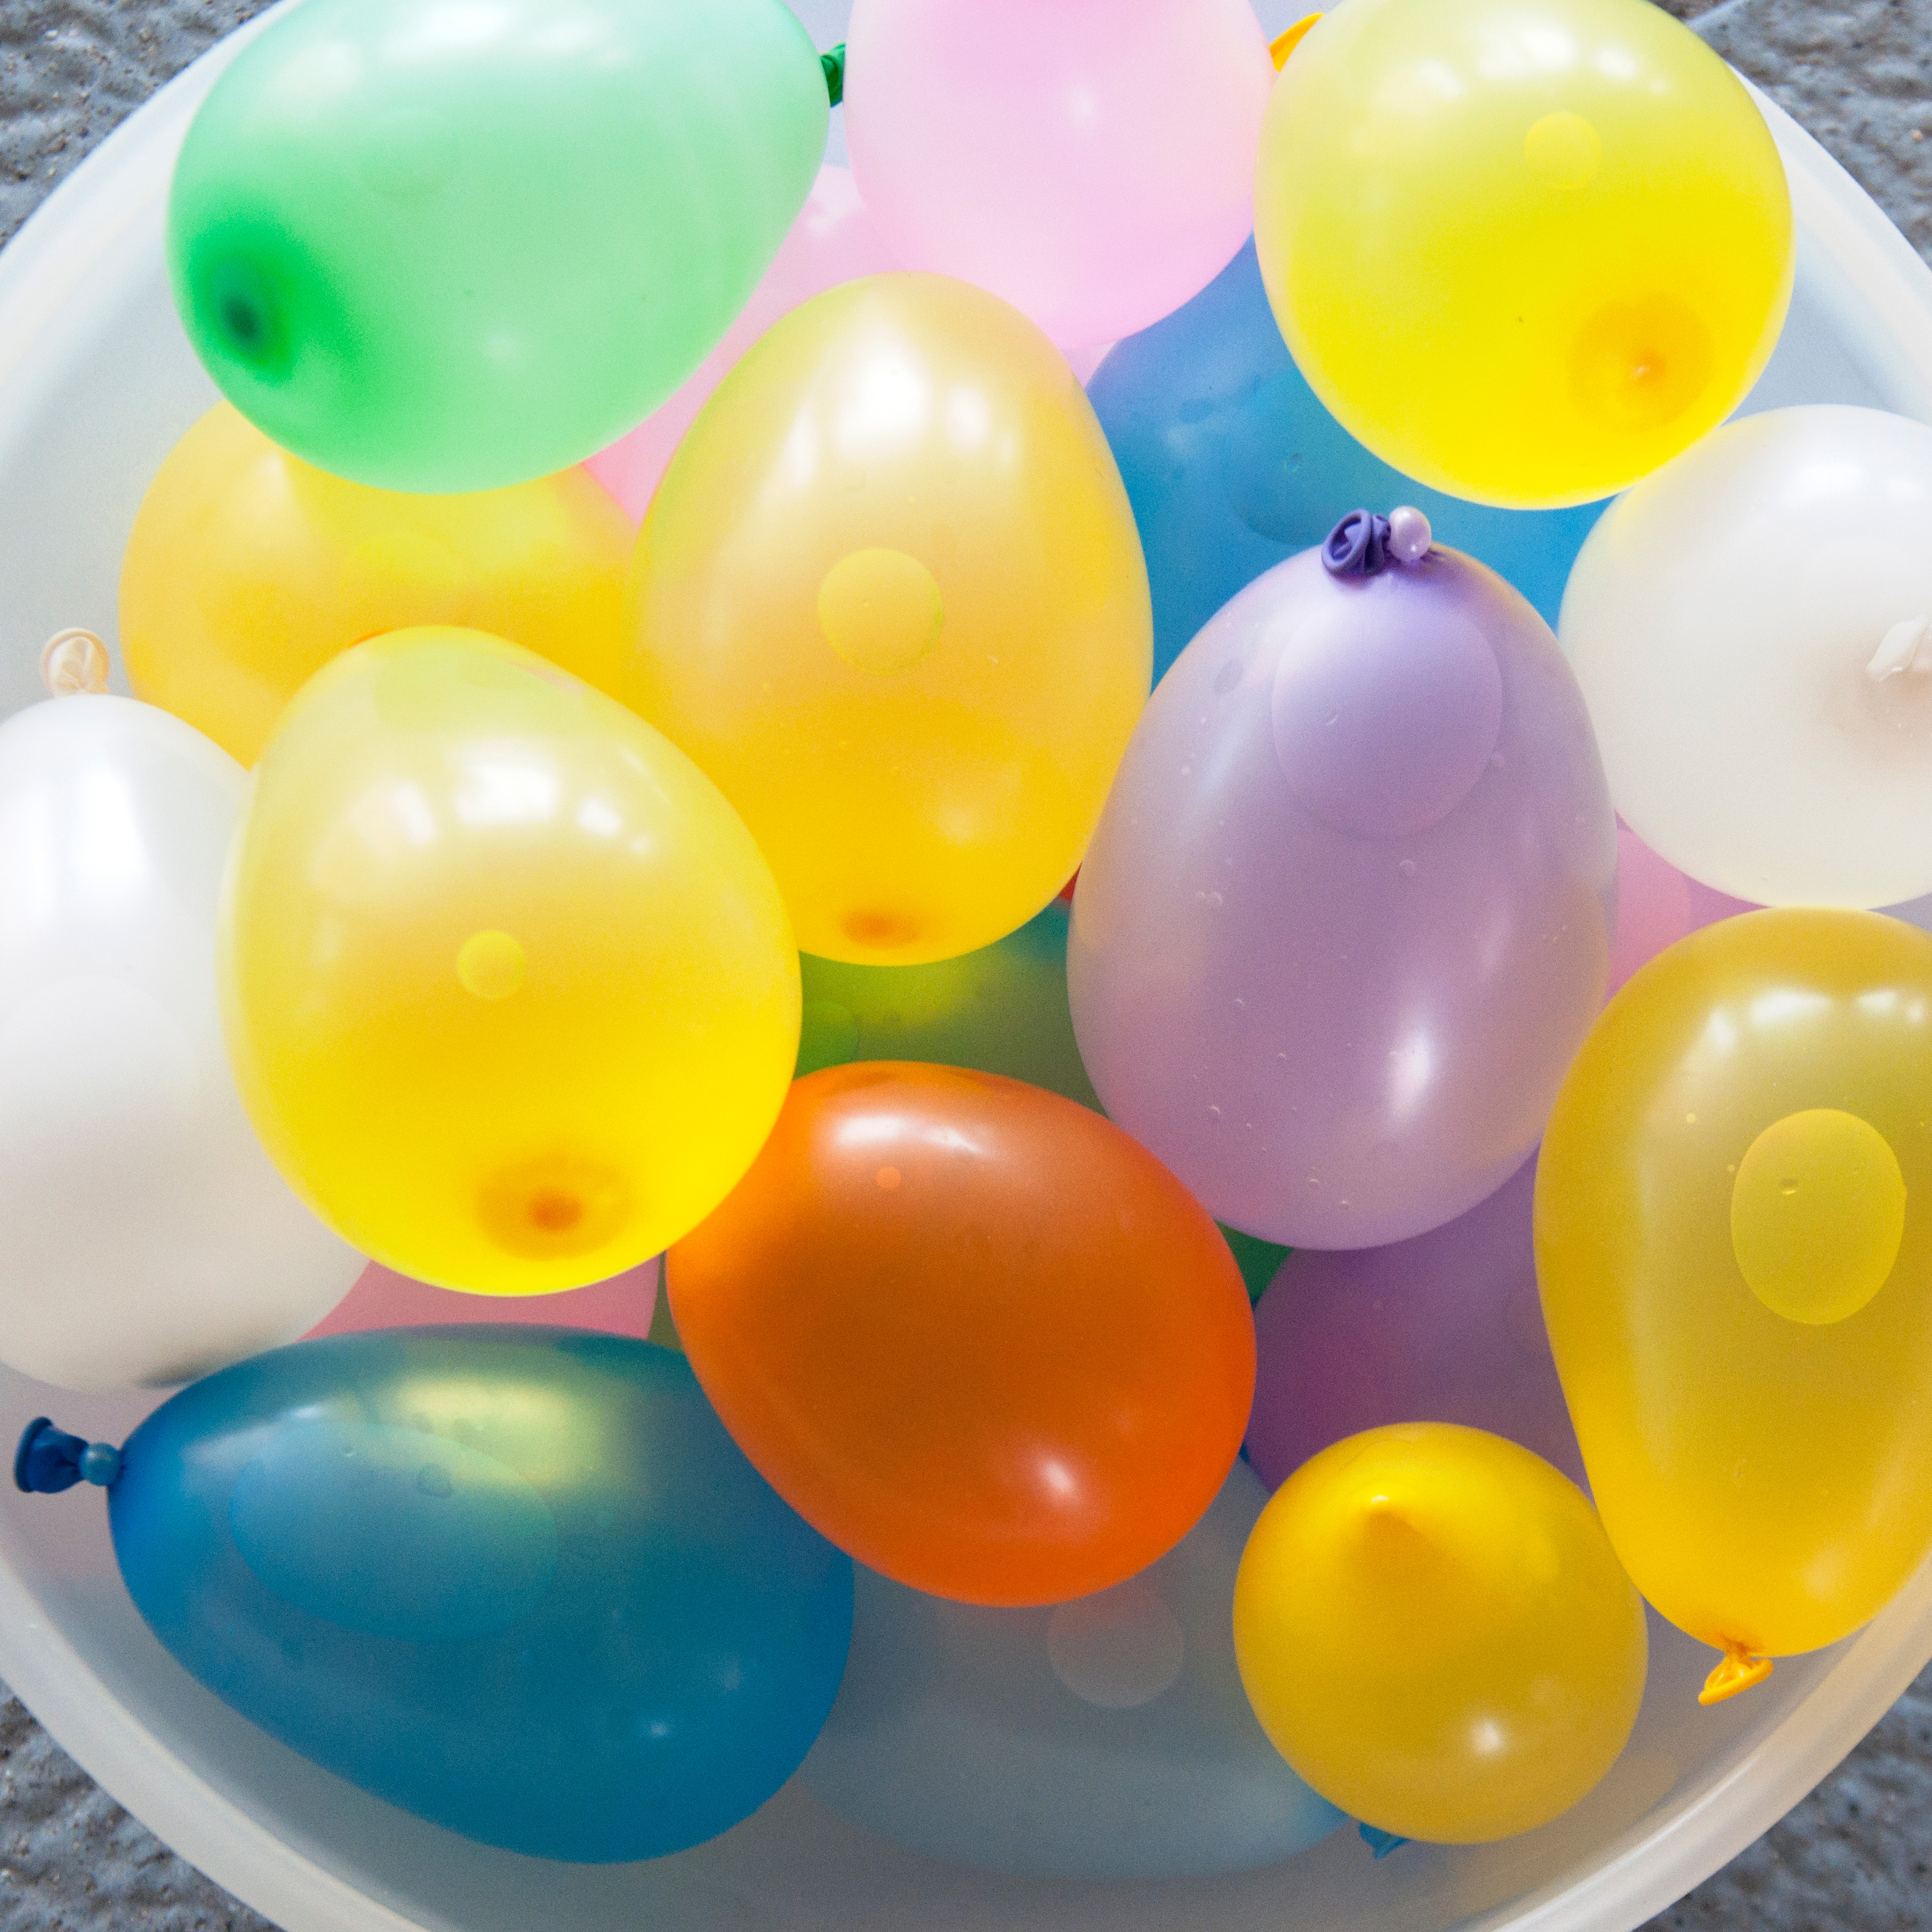 A bucket full of water balloons.